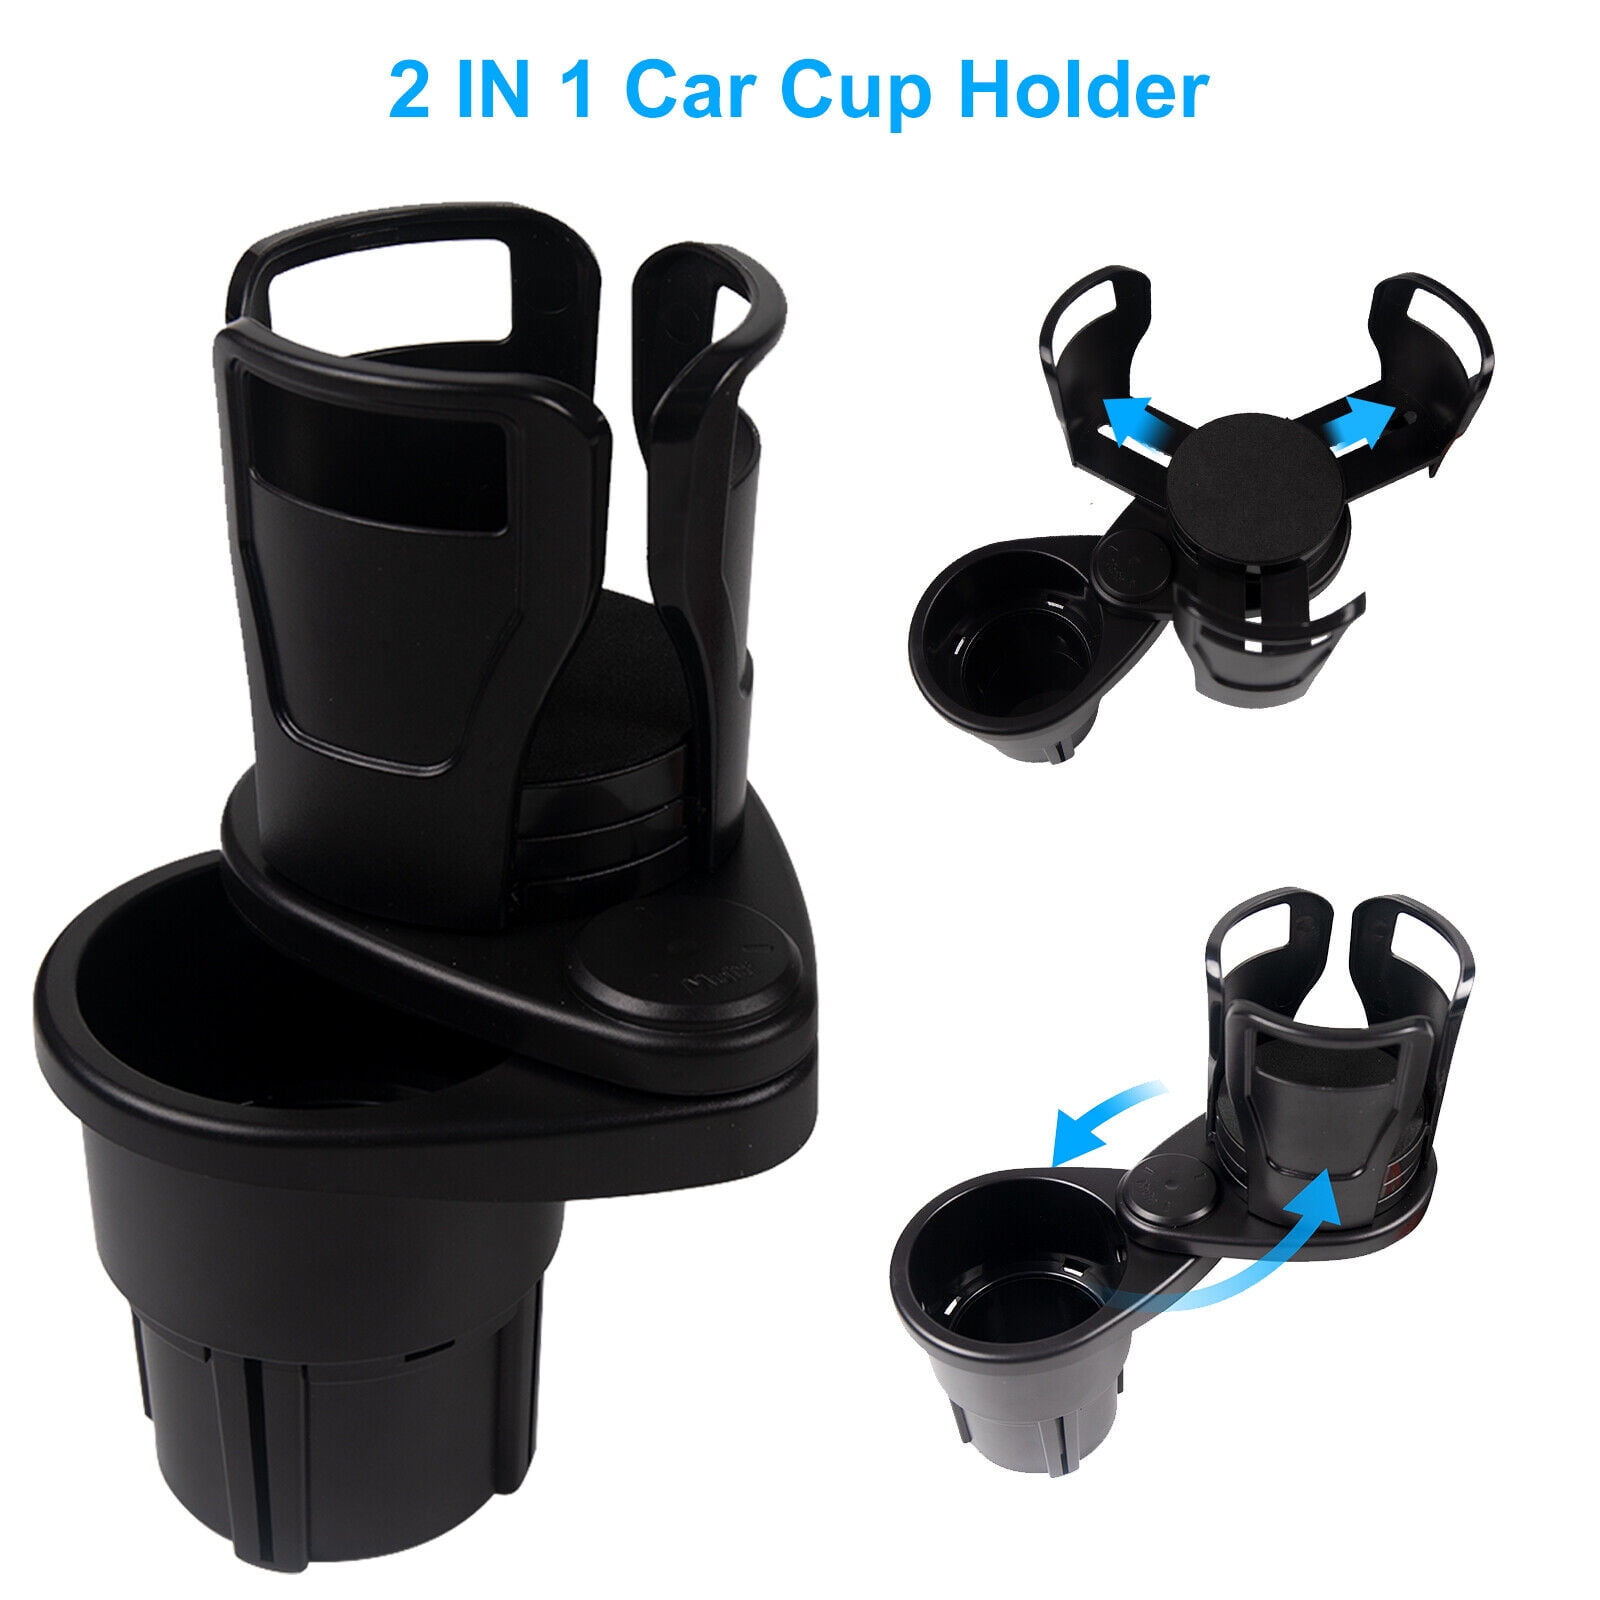 2 in 1 Auto Cup Holder Expander, Multifunktionaler Namibia